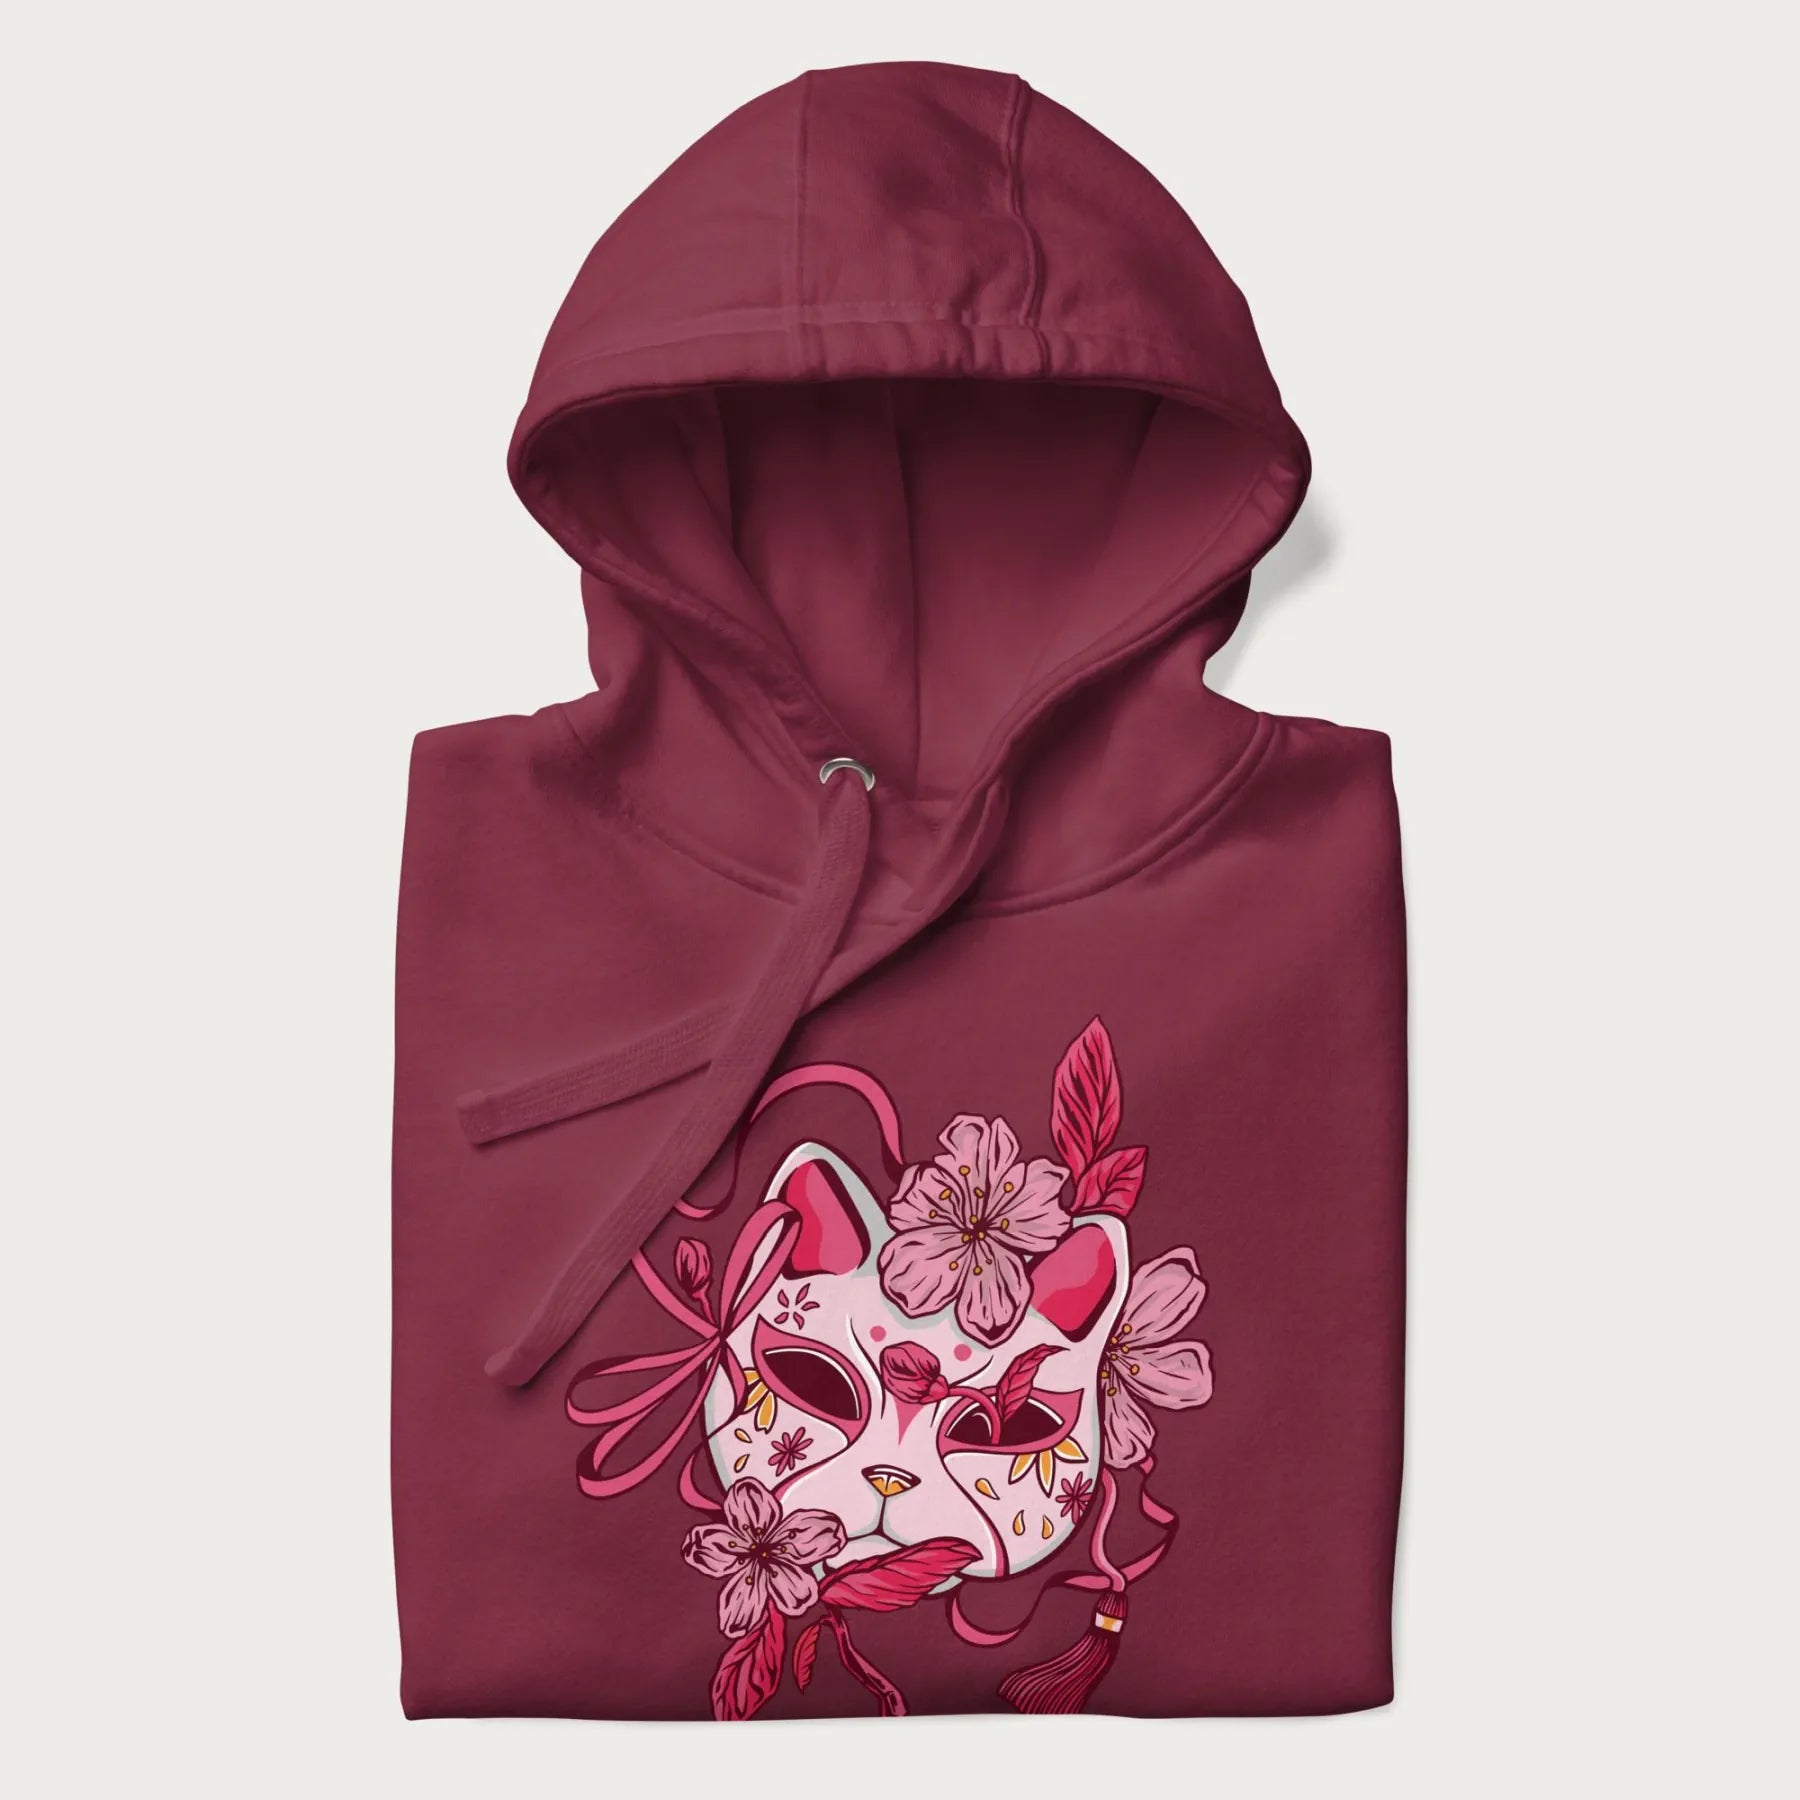 Folded maroon hoodie with a Japanese kitsune mask and sakura design on the front.